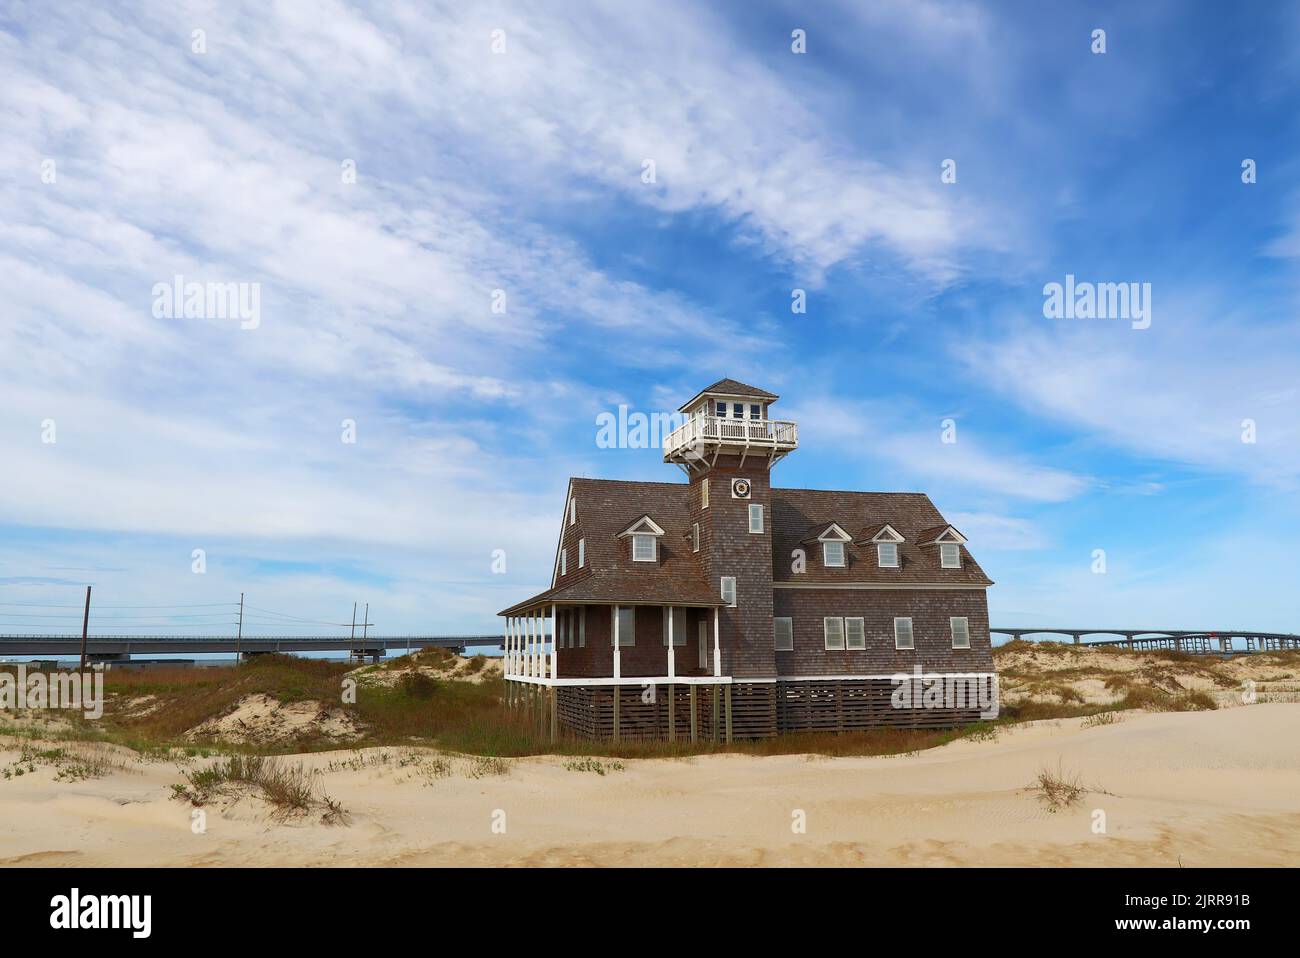 Historic Oregon Inlet life-saving station on Pea Island near Rodanthe, on the outer banks of North Carolina against a dramatic blue sky Stock Photo